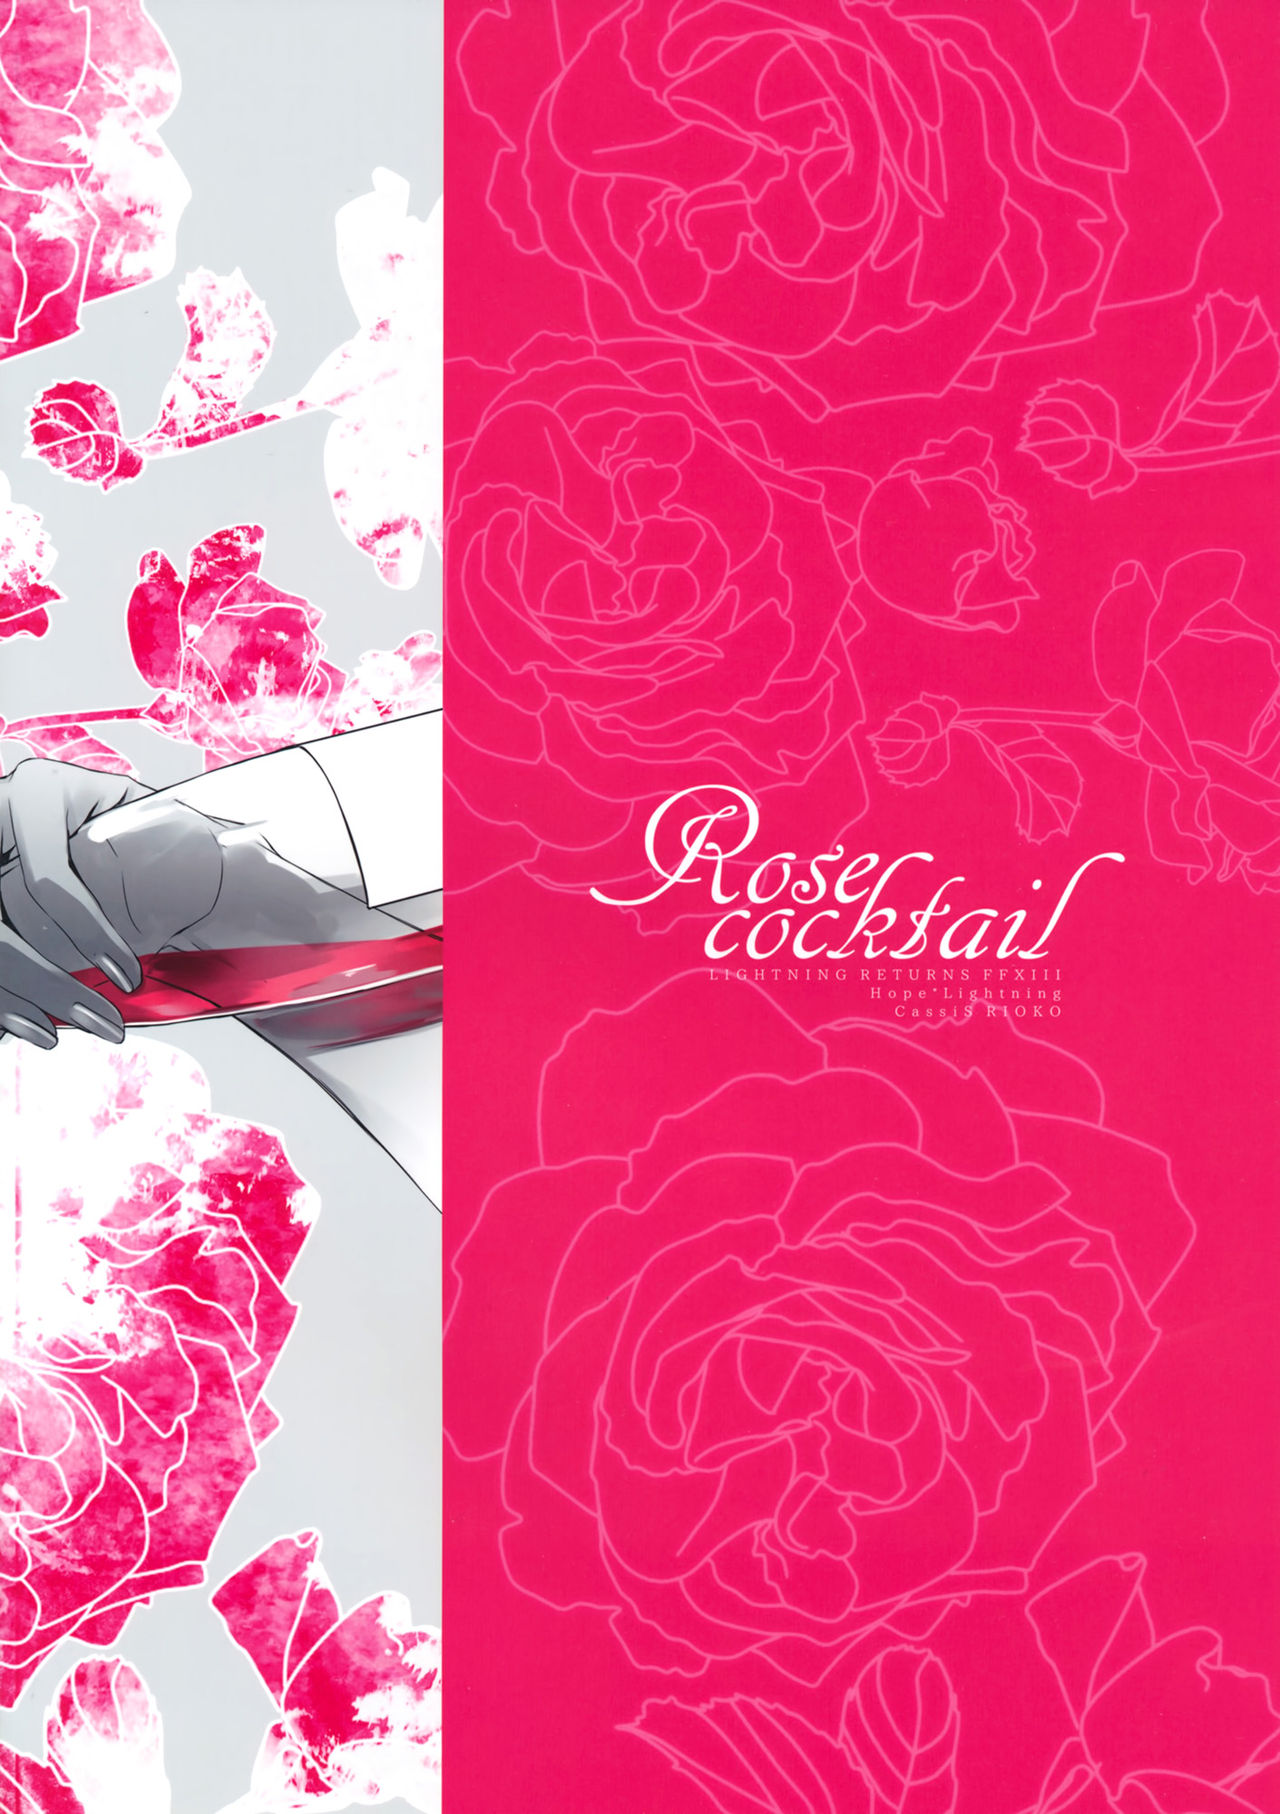 (C87) [CassiS (RIOKO)] Rose cocktail (Final Fantasy XIII) [Chinese] [临时义军] (C87) [CassiS (りおこ)] Rose cocktail (ファイナルファンタジーXIII) [中国翻訳]